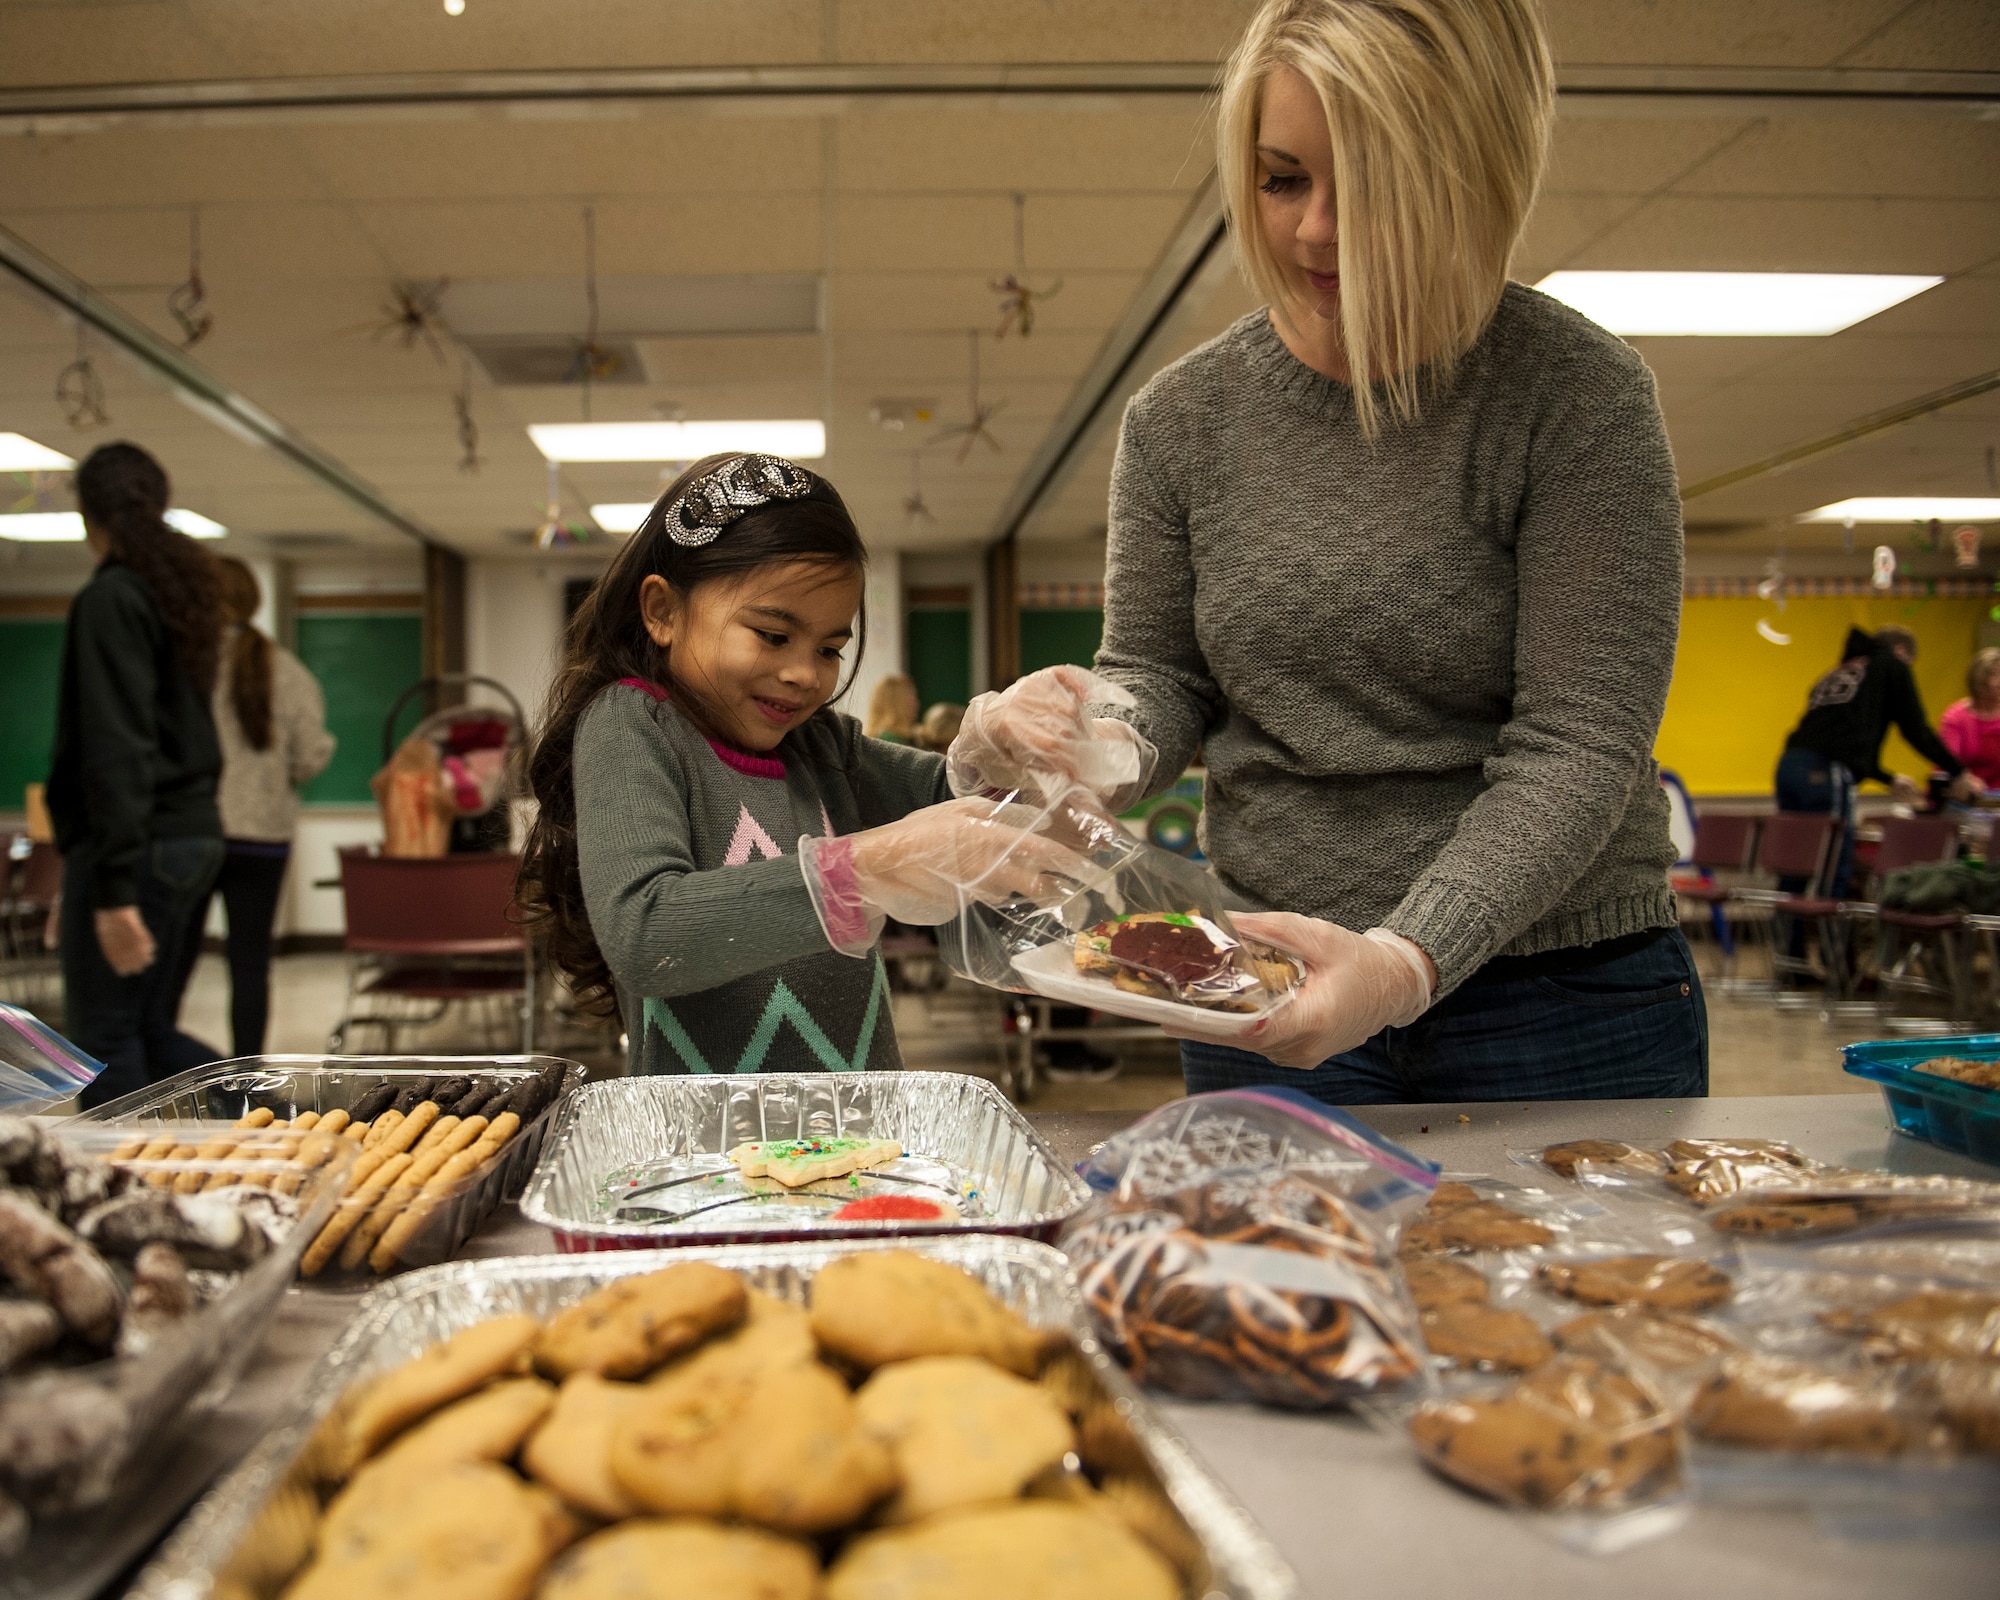 Kalena, 8, helps her mother put cookies onto a tray during the Airman Cookie Drive at Nellis Air Force Base, Nev., Dec. 14, 2015. Kalena was one of approximetly 100 volunteers who came together to show Airmen living in the Nellis AFB dormitories they are not forgotten during the holiday season. (U.S. Air Force photo by Staff Sgt. Siuta B. Ika)